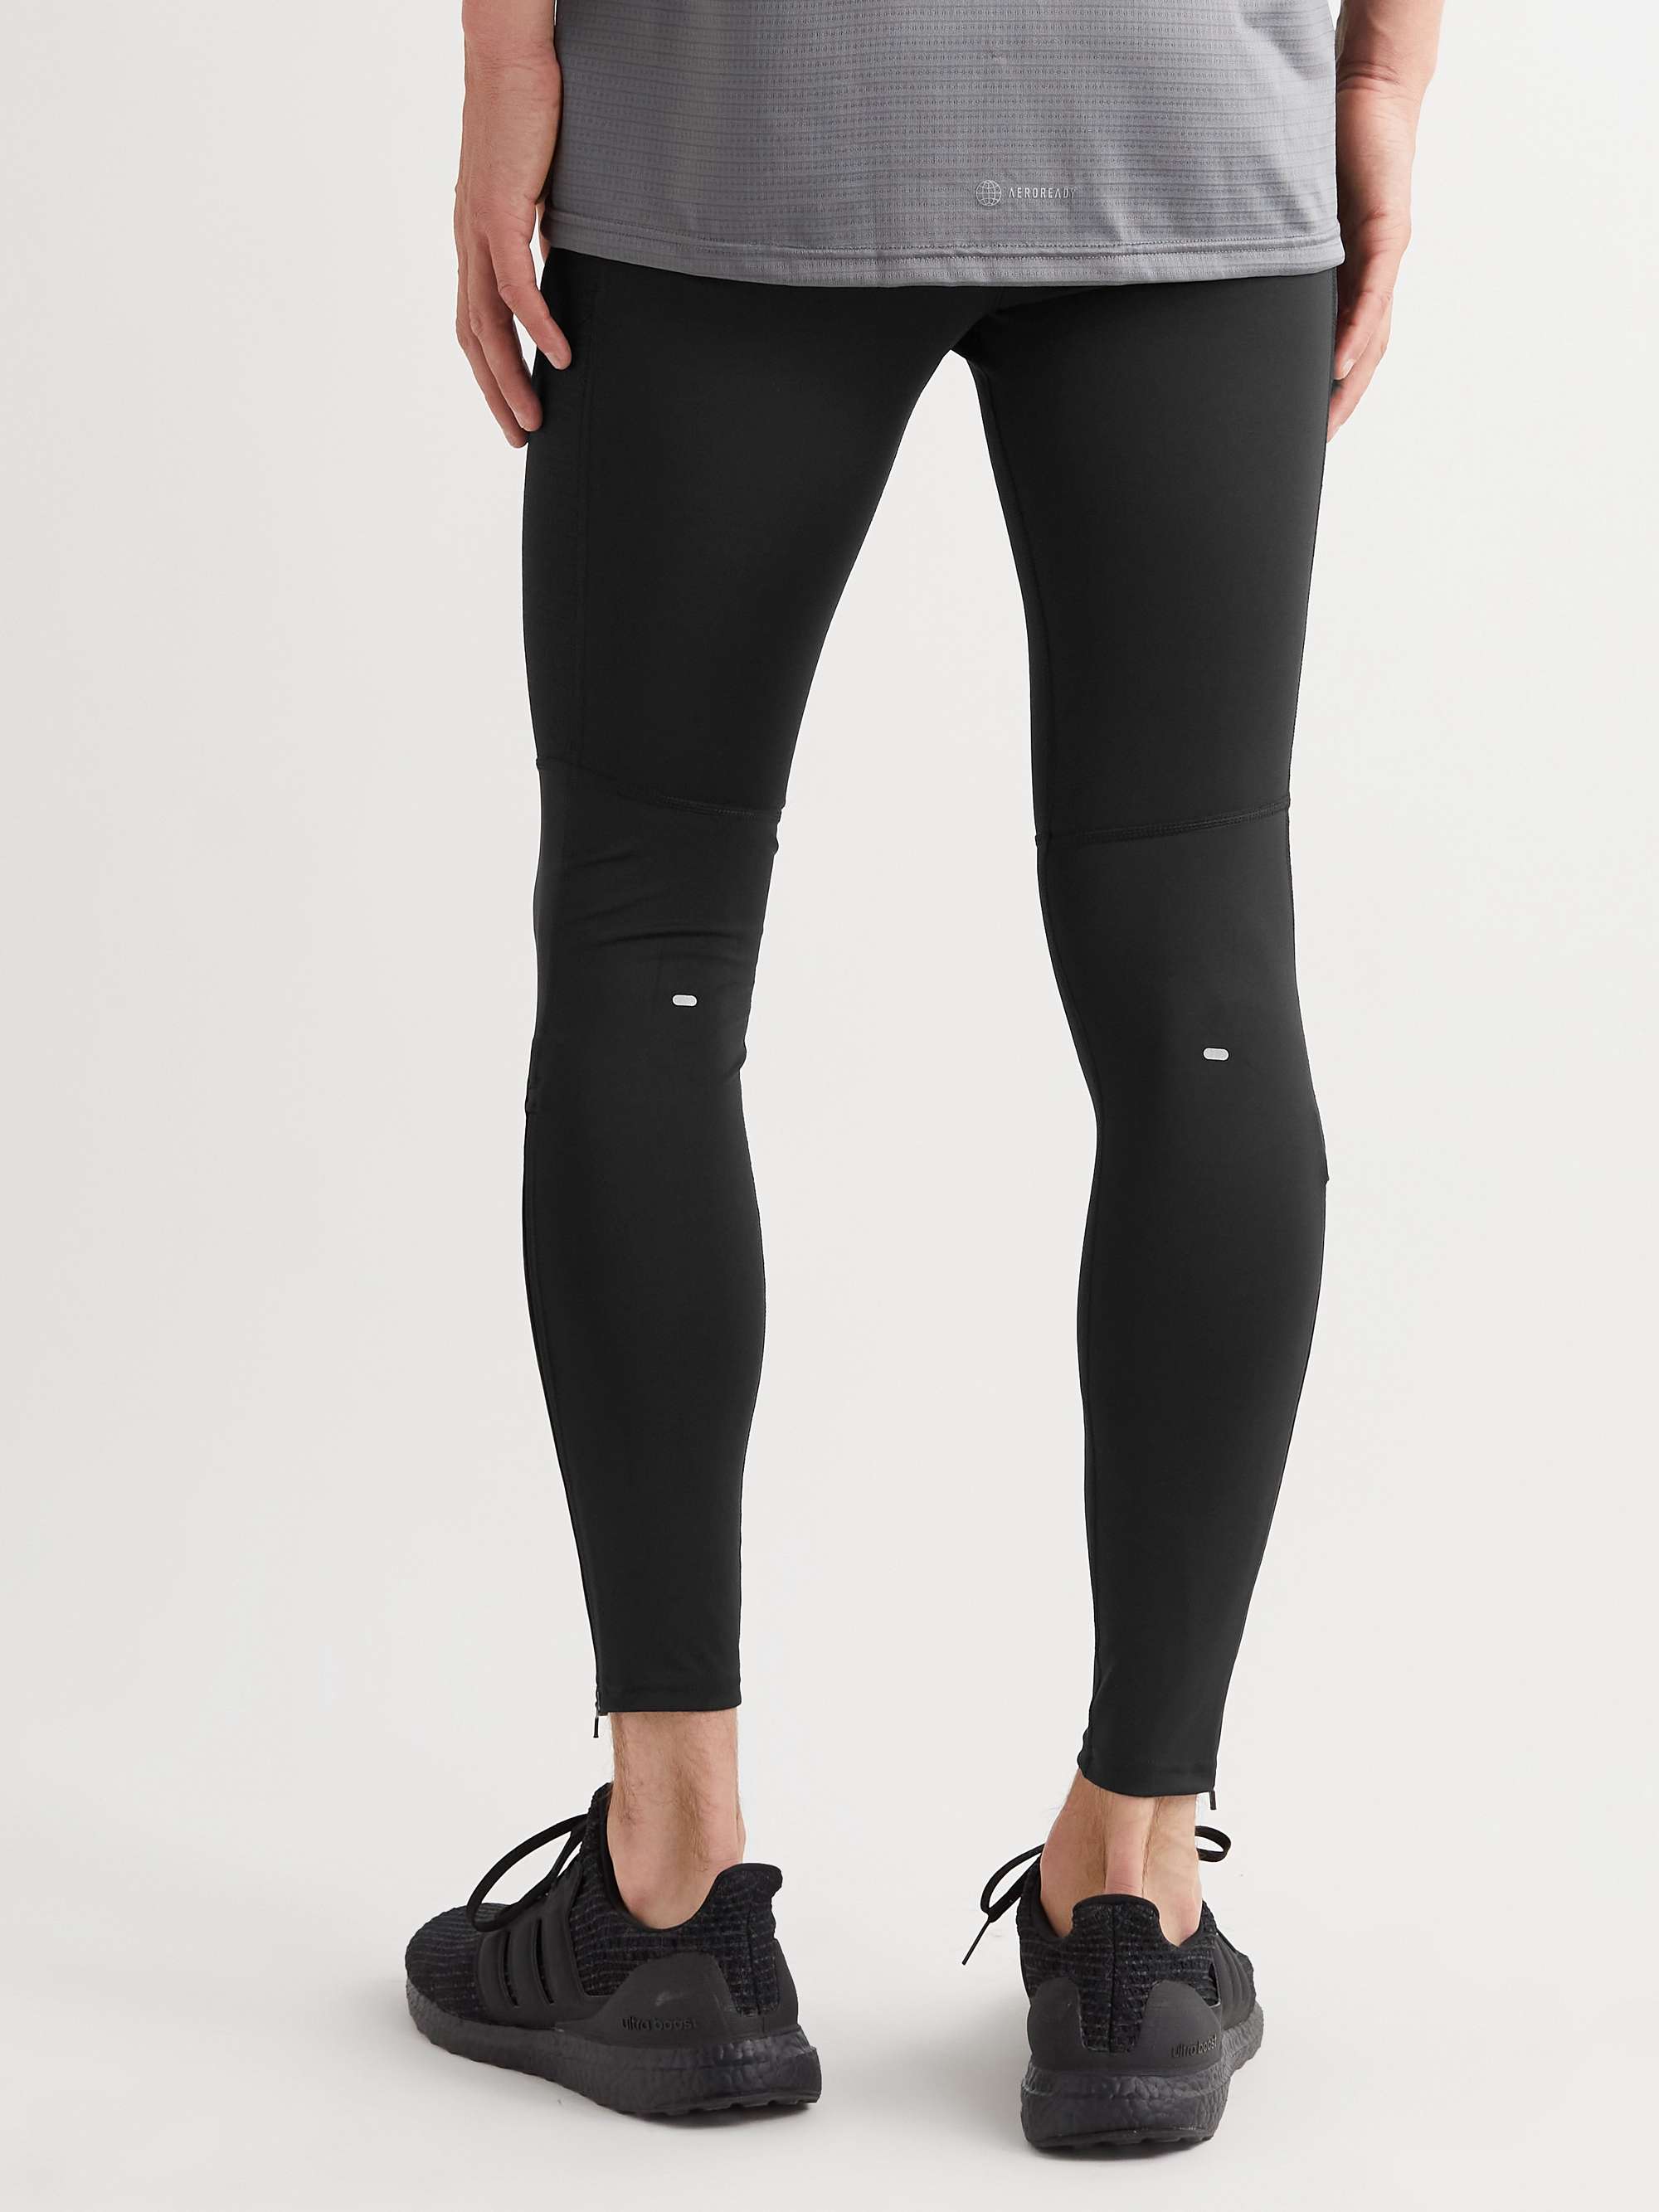 ADIDAS SPORT Own the Run Recycled AEROREADY Stretch-Jersey Running Tights